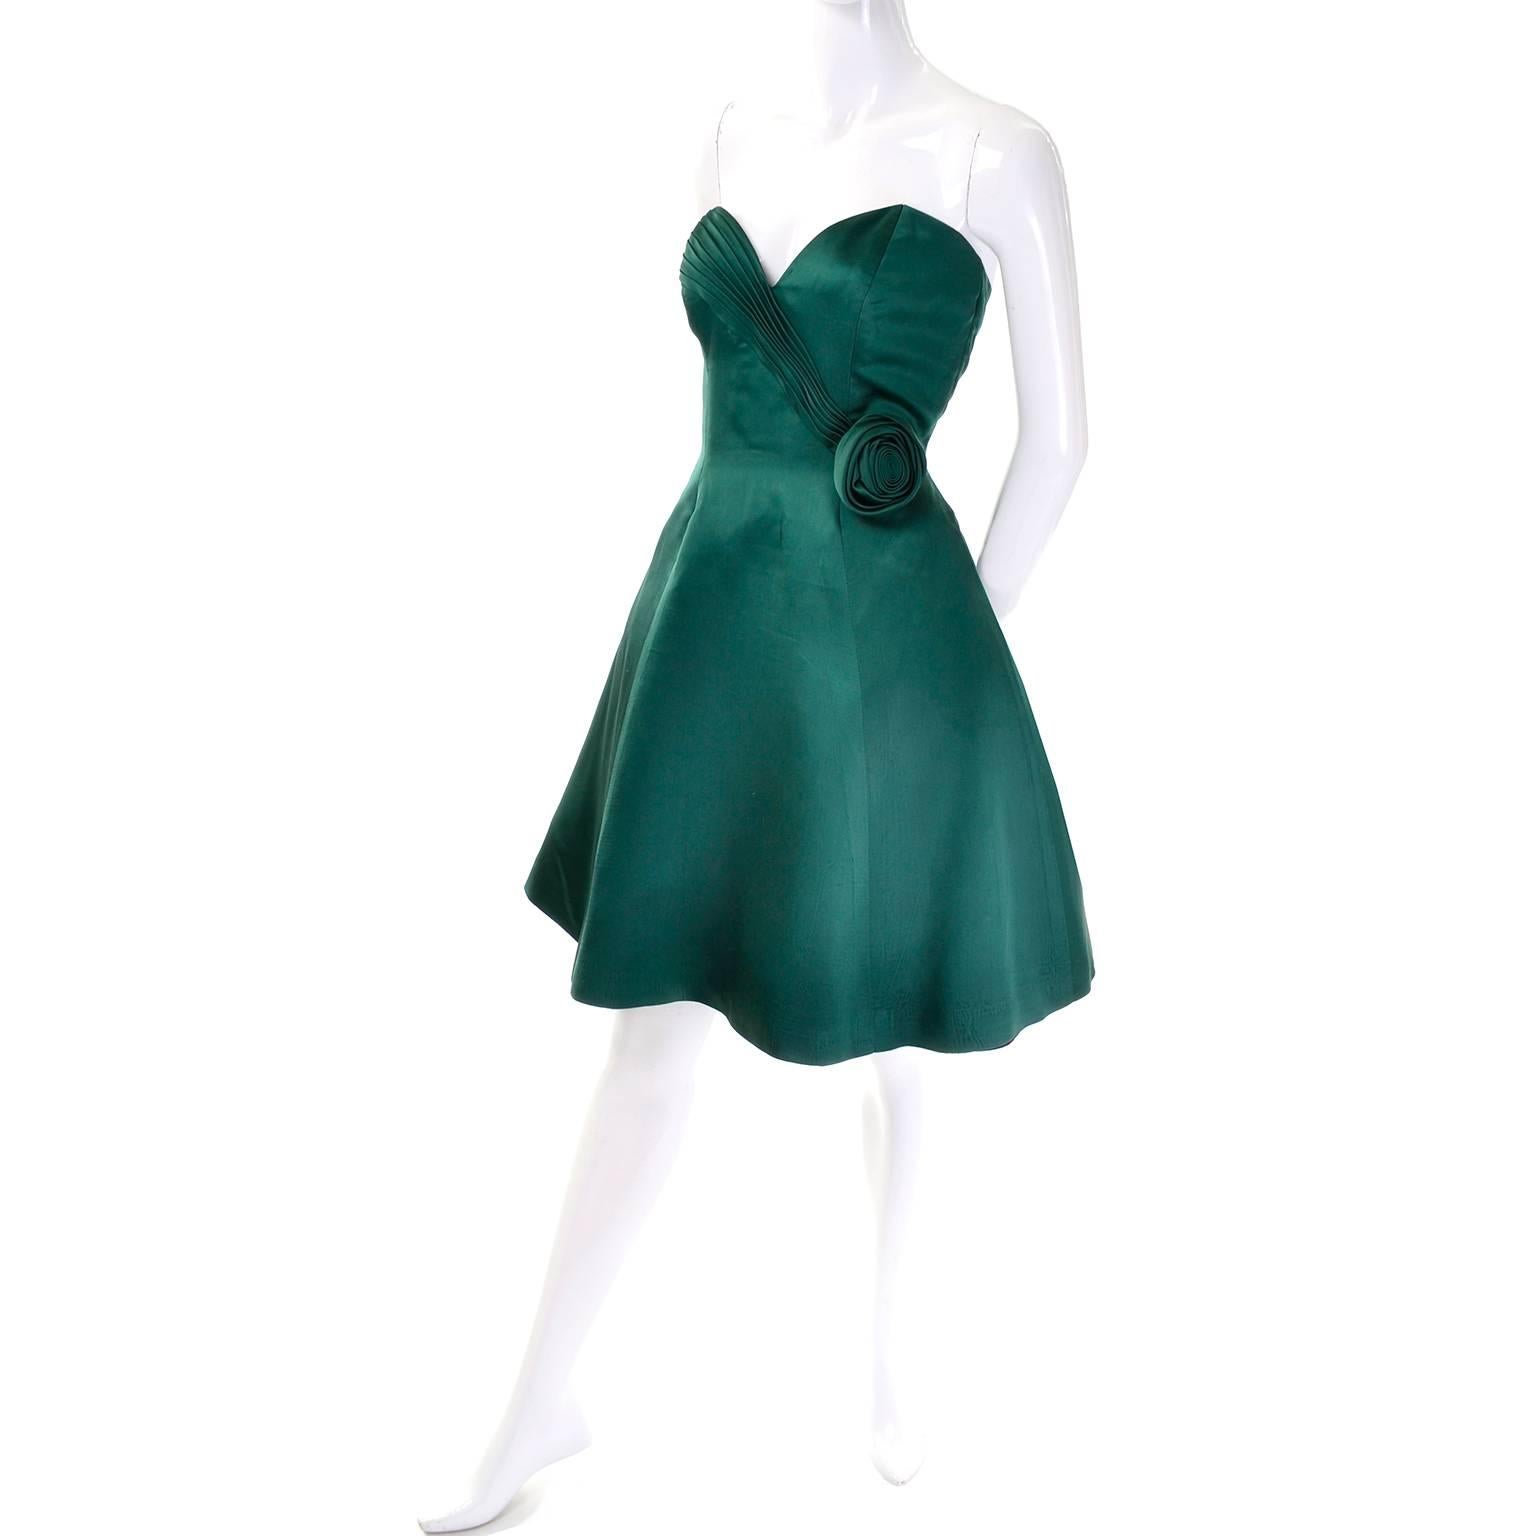 This vintage green evening dress was designed by Vicky Tiel and purchased at Bergdorf Goodman in the 1980's.  The dress is strapless and has a pretty pleated, sweetheart bodice, a rosette 